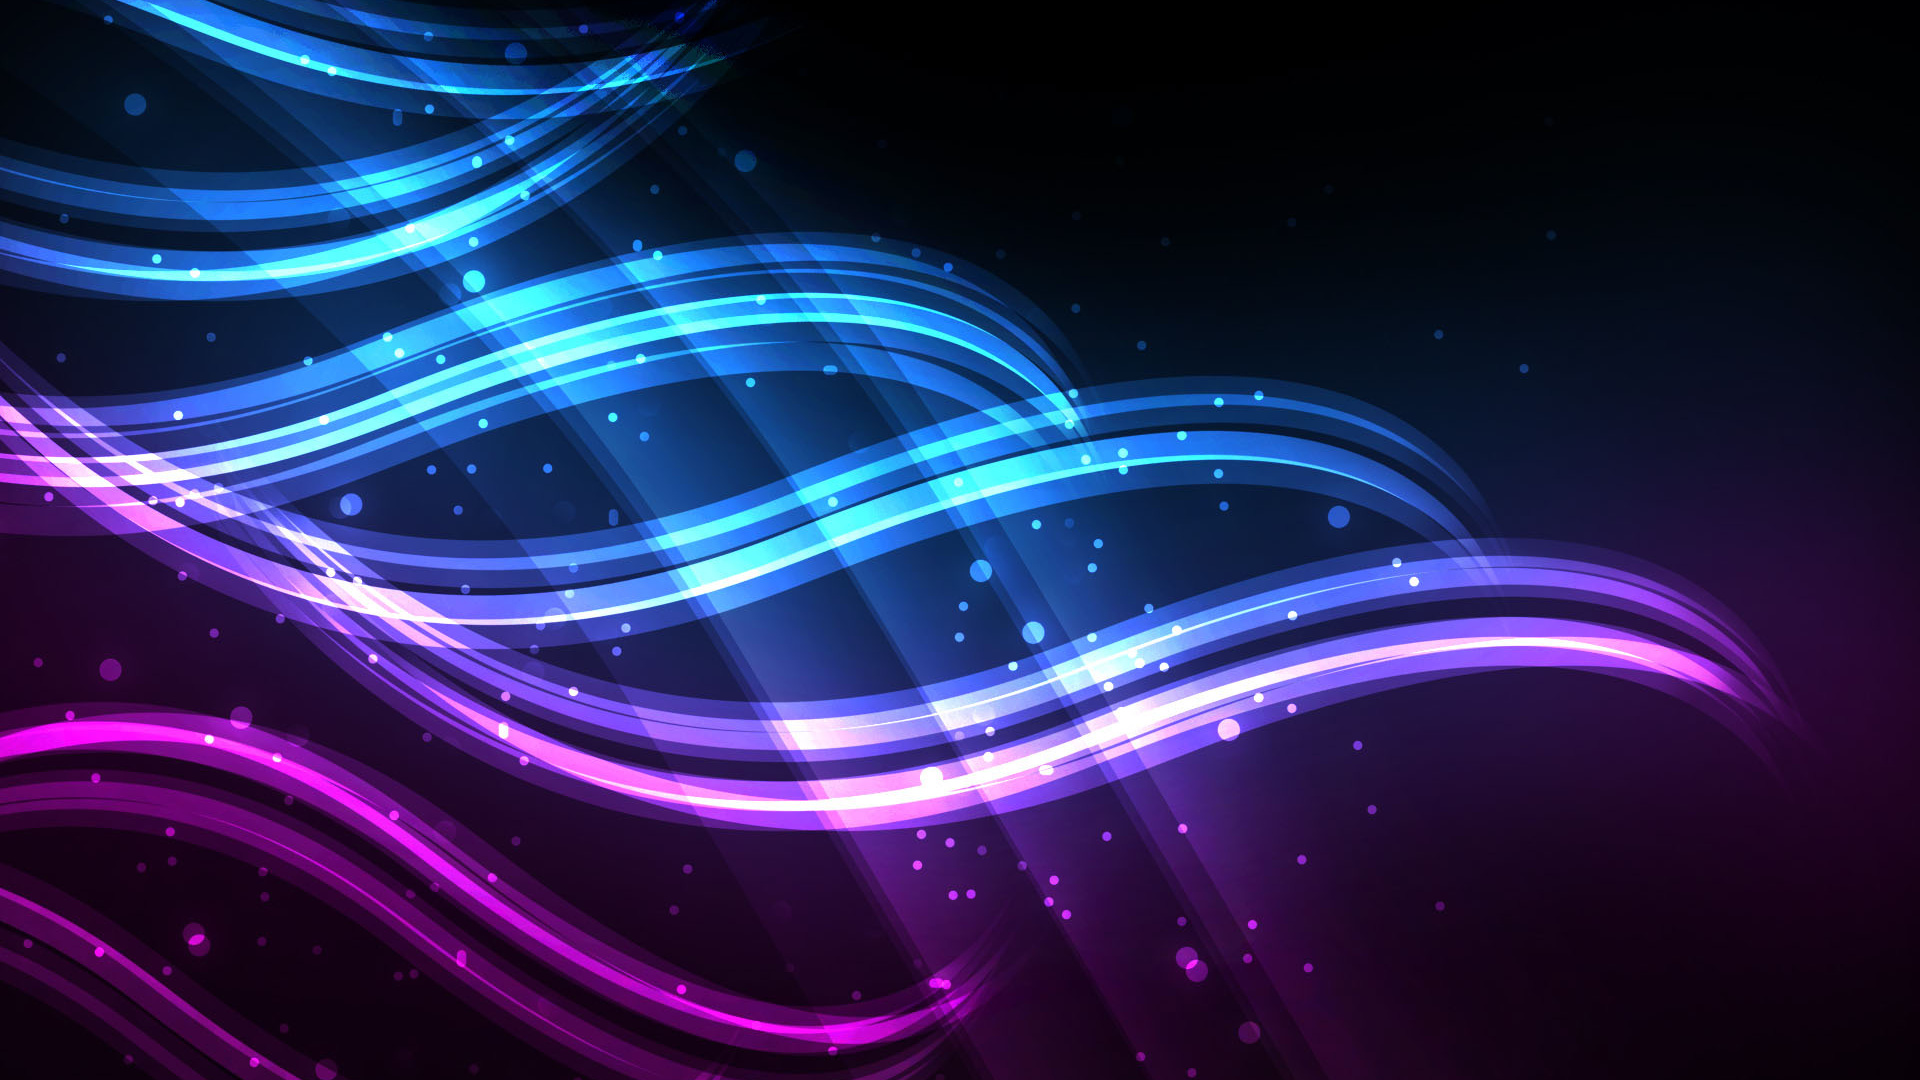 HD Abstract Awesome Desktop Wallpaper 1080p